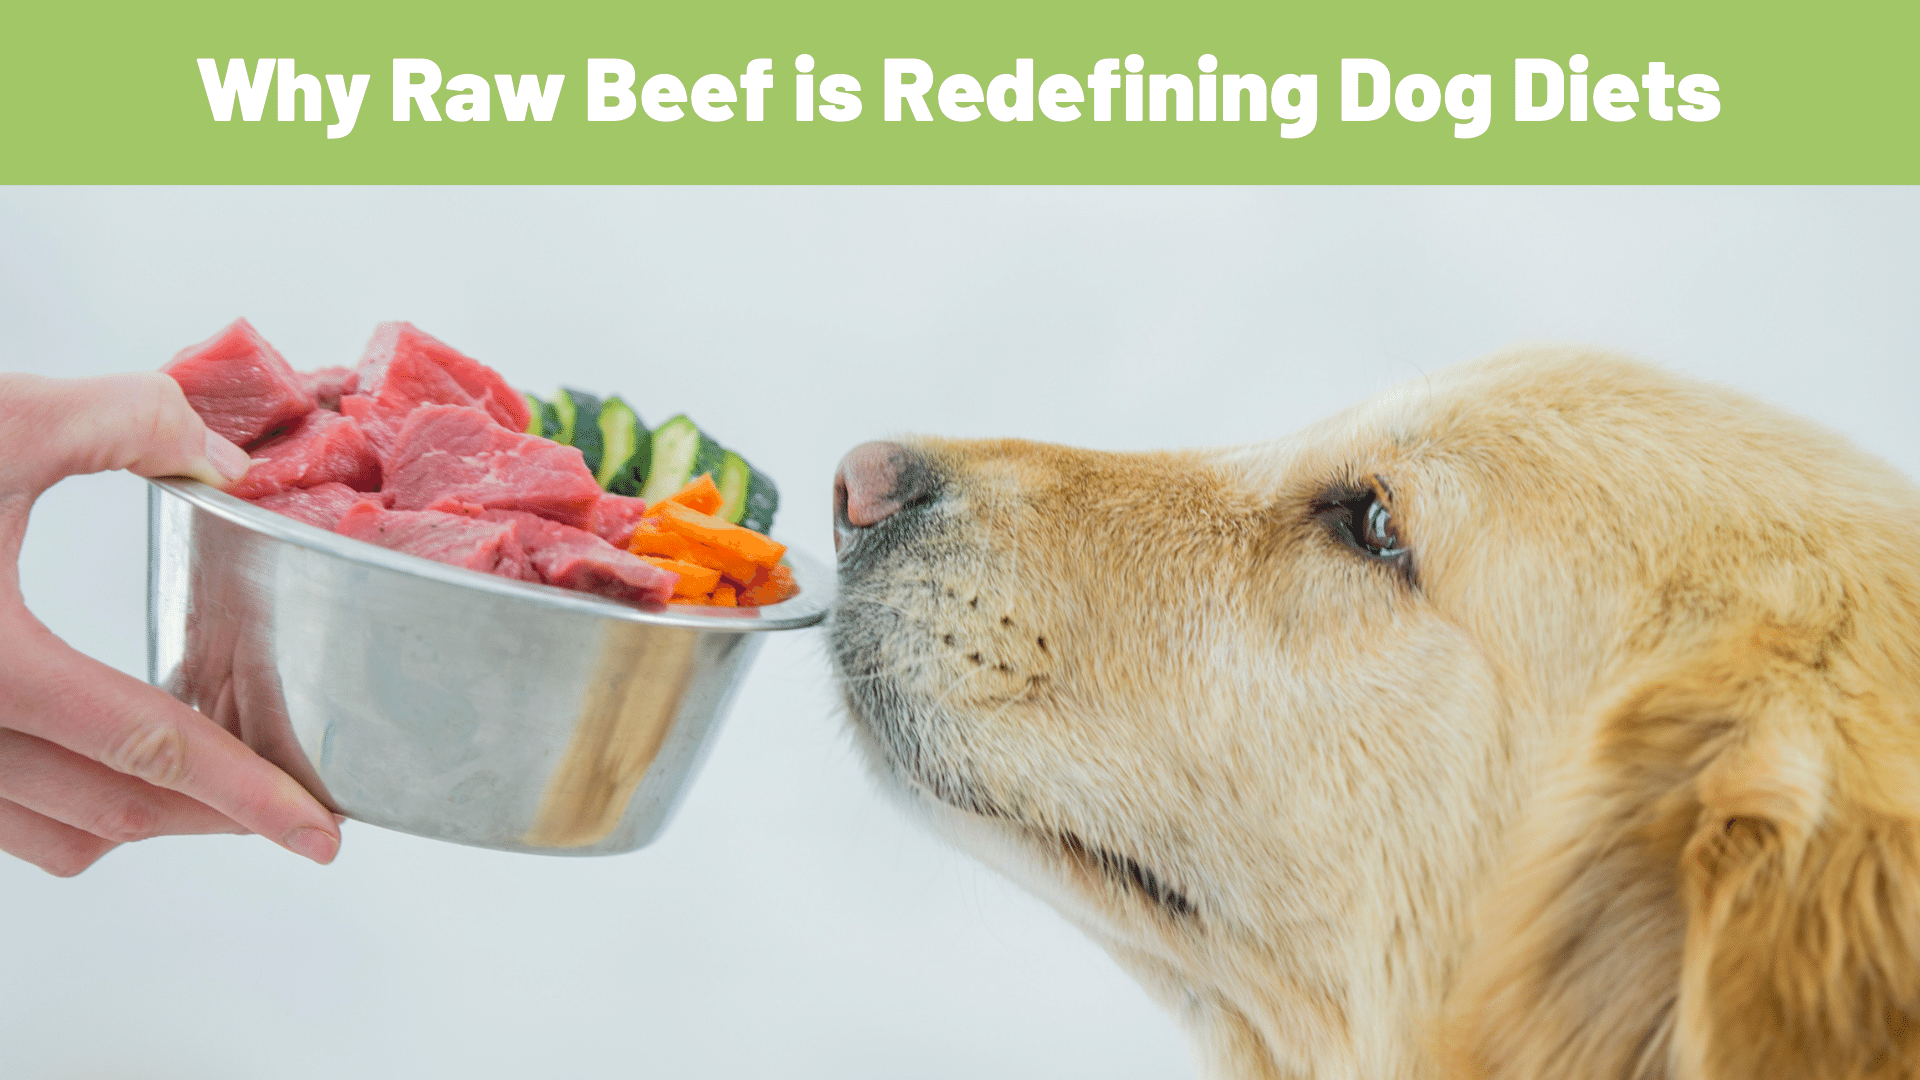 Ditch the Dish, Grab the Meat: Why Raw Beef is Redefining Dog Diets - www.RawOrigins.pet - The Raw Dog Food Company